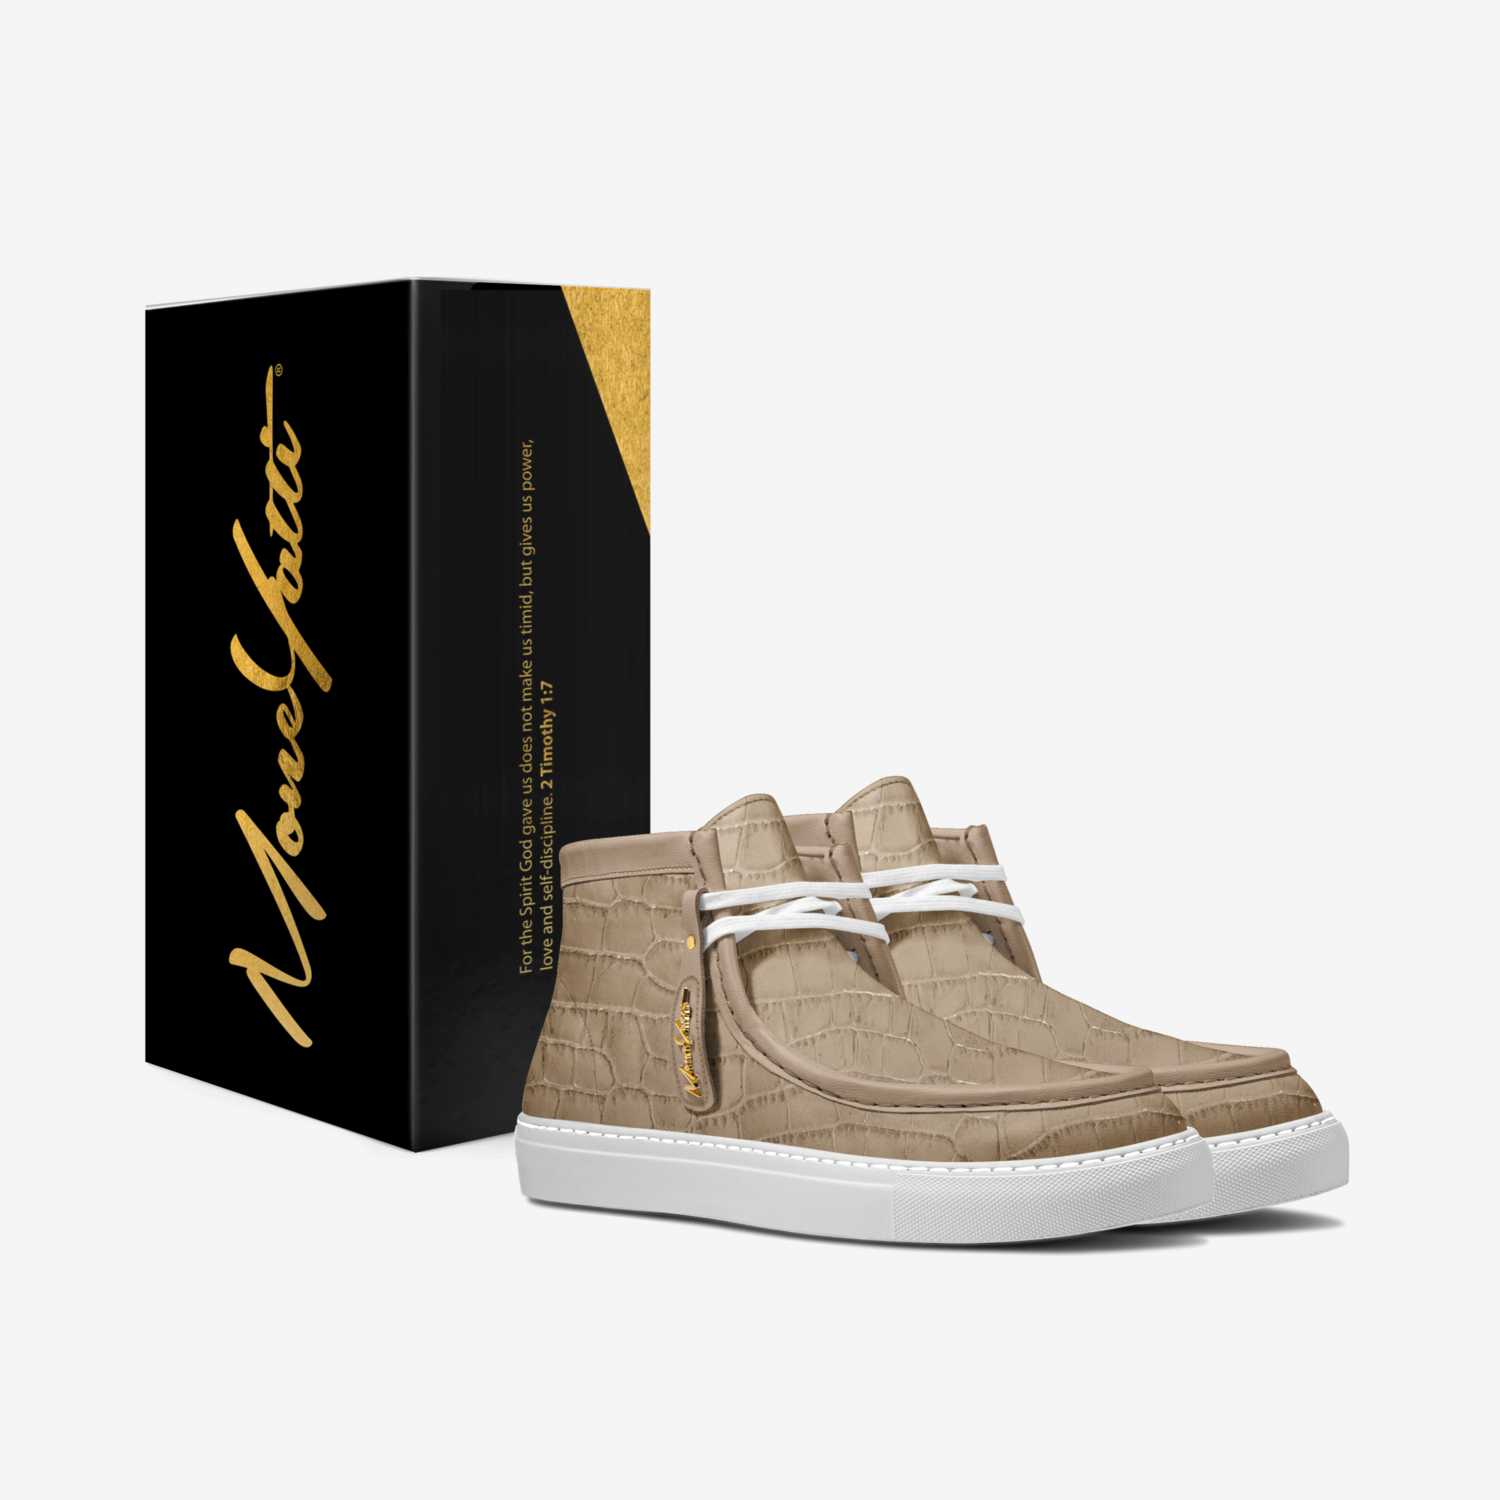 LUX 002 custom made in Italy shoes by Moneyatti Brand | Box view